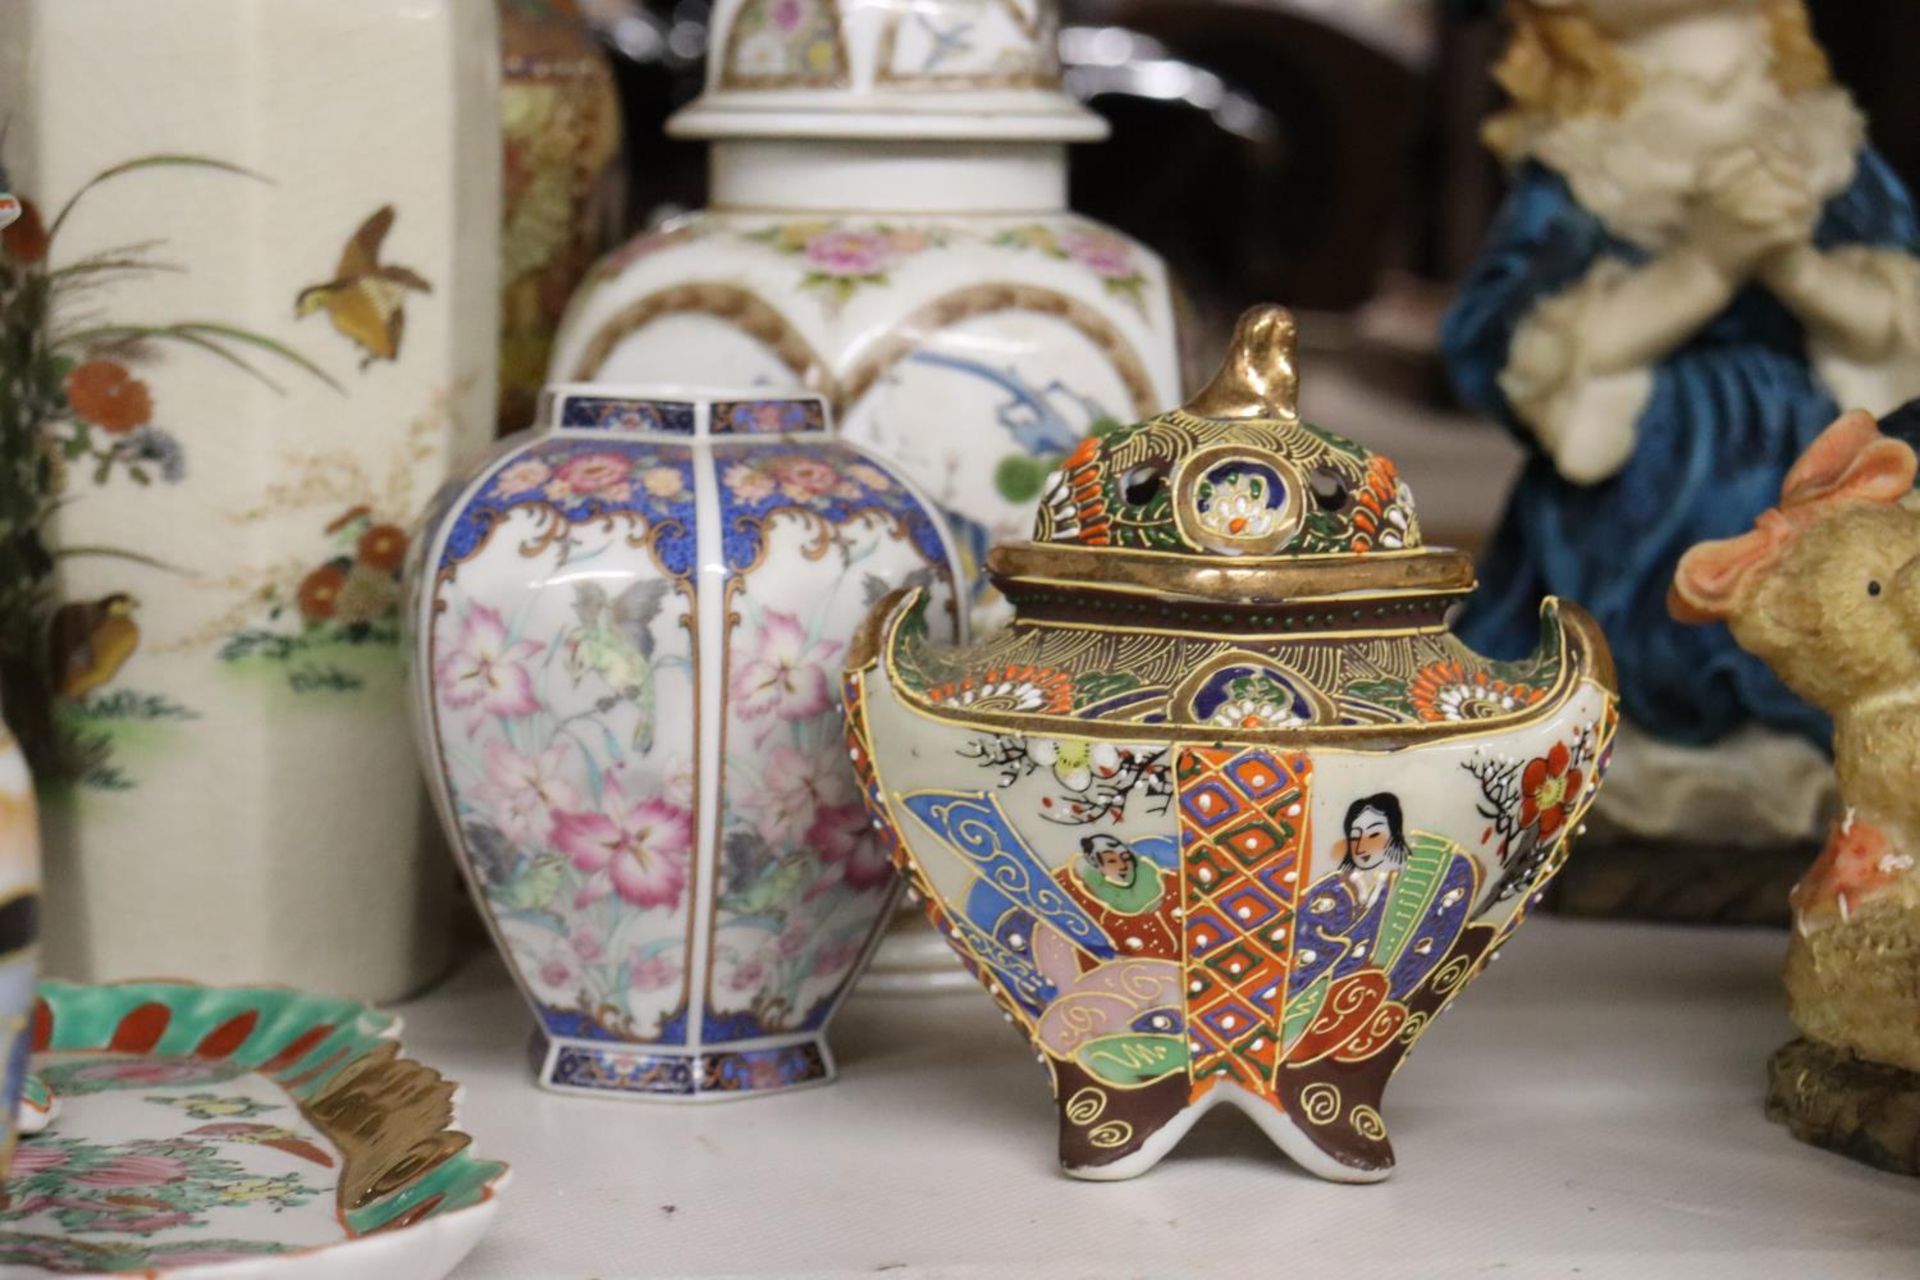 A QUANTITY OF ORIENTAL CERAMICS TO INCLUDE A HAND PAINTED VASE, CANDLE STICKS, TRINKET BOXES, ETC - Image 4 of 8